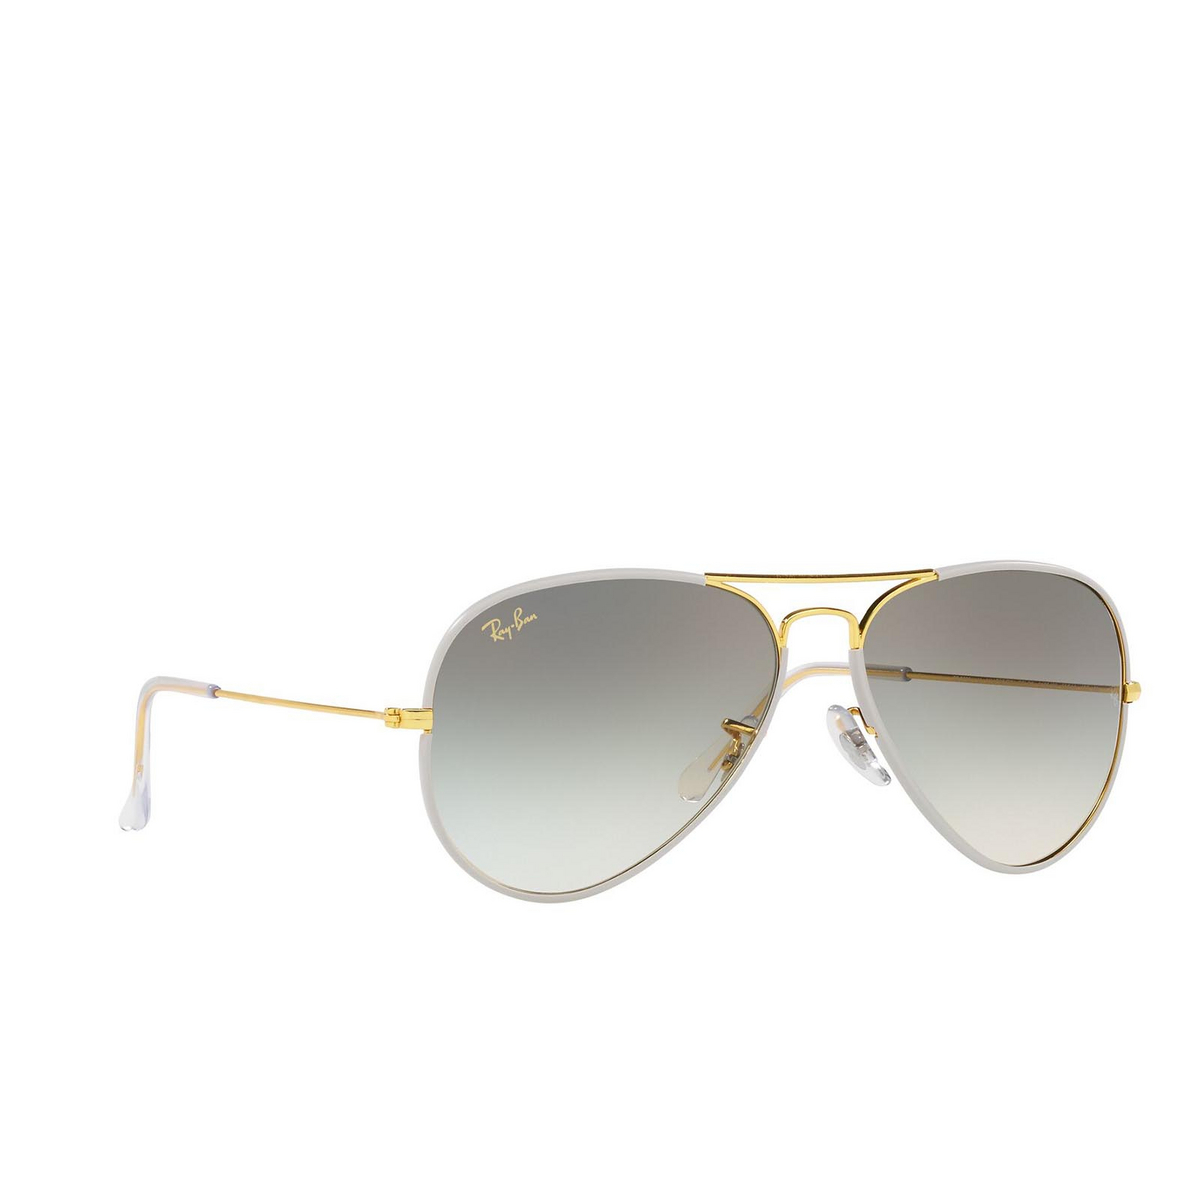 Ray-Ban AVIATOR FULL COLOR Sunglasses 919632 Grey on Legend Gold - three-quarters view